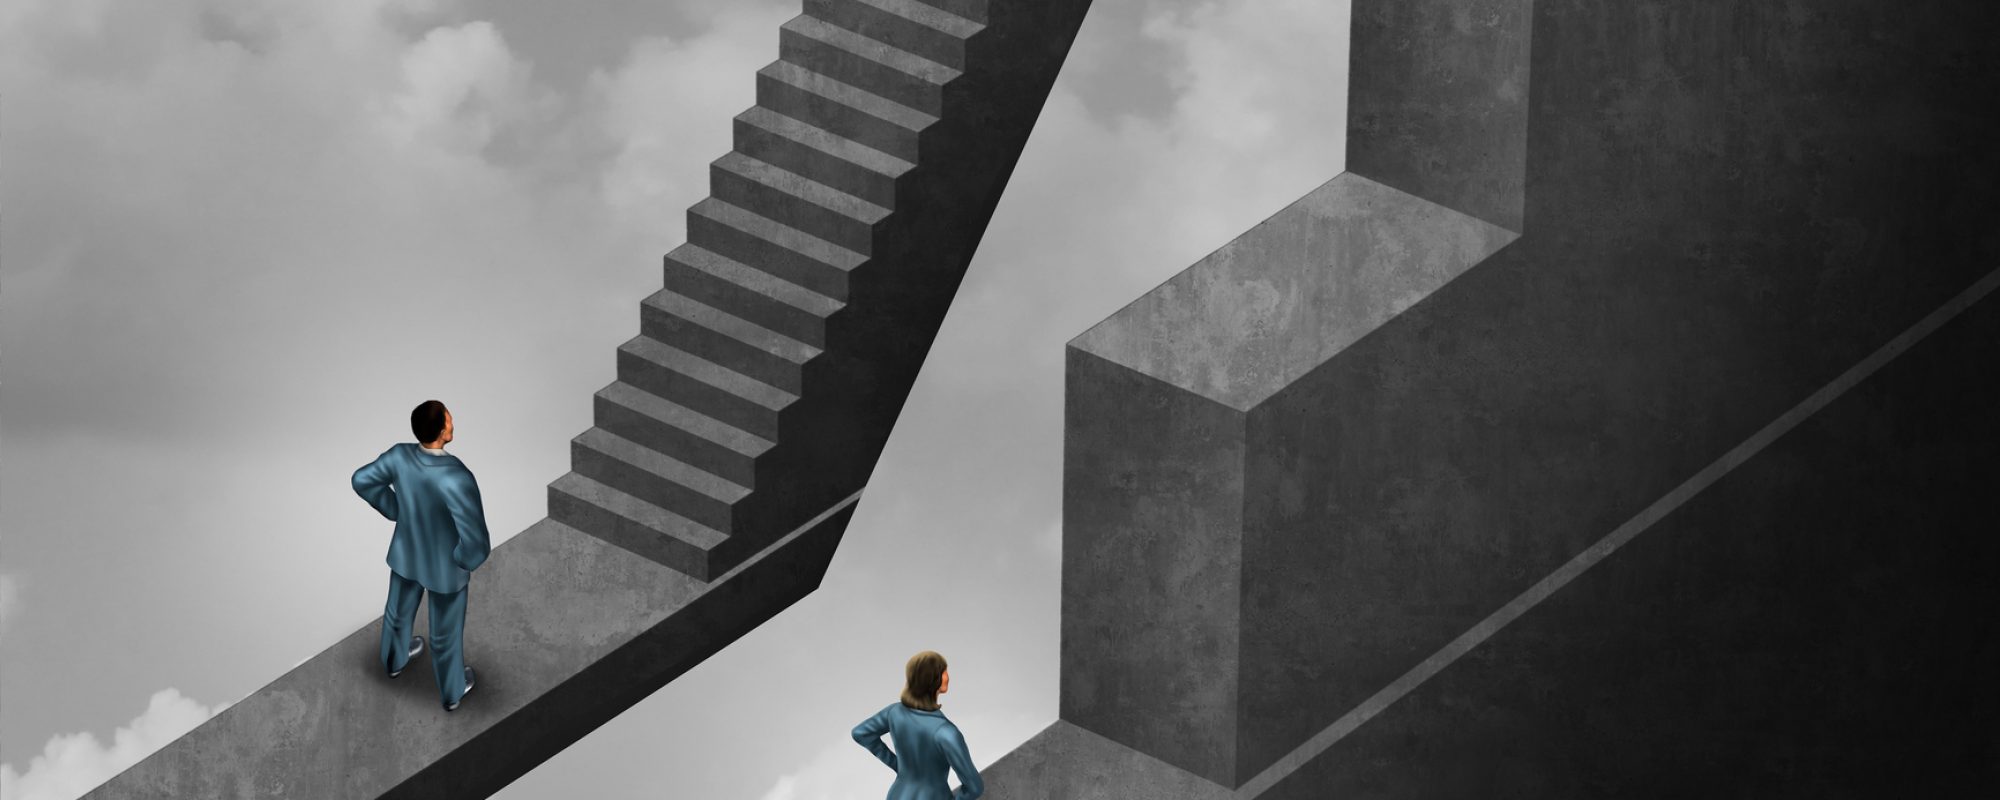 Gender discrimination and sexism inequality for being female concept as a woman with the burden of climbing a difficult obstacle and a man with easy path stairs as a 3D illustration symbol as a symbol for unfair gender bias.